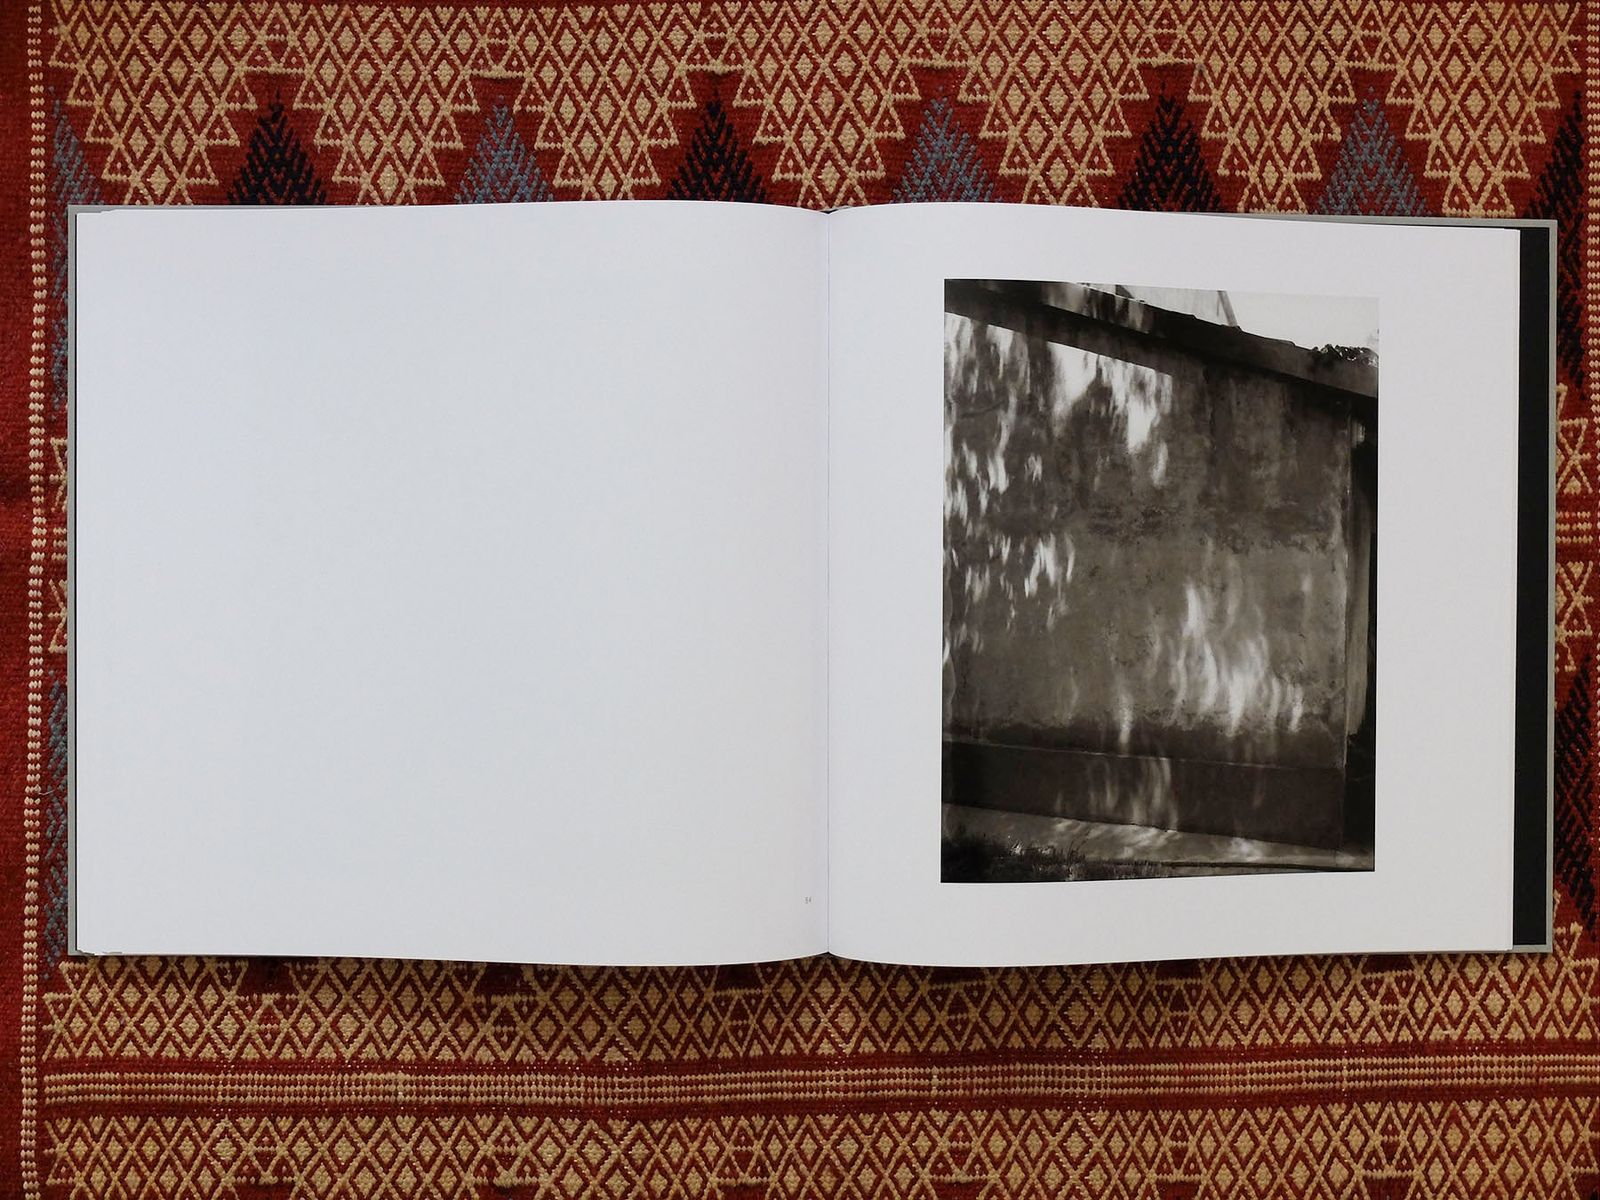 © Leporello Books - Image from the LUNARIO, 1968-1999 by Guido Guidi photography project